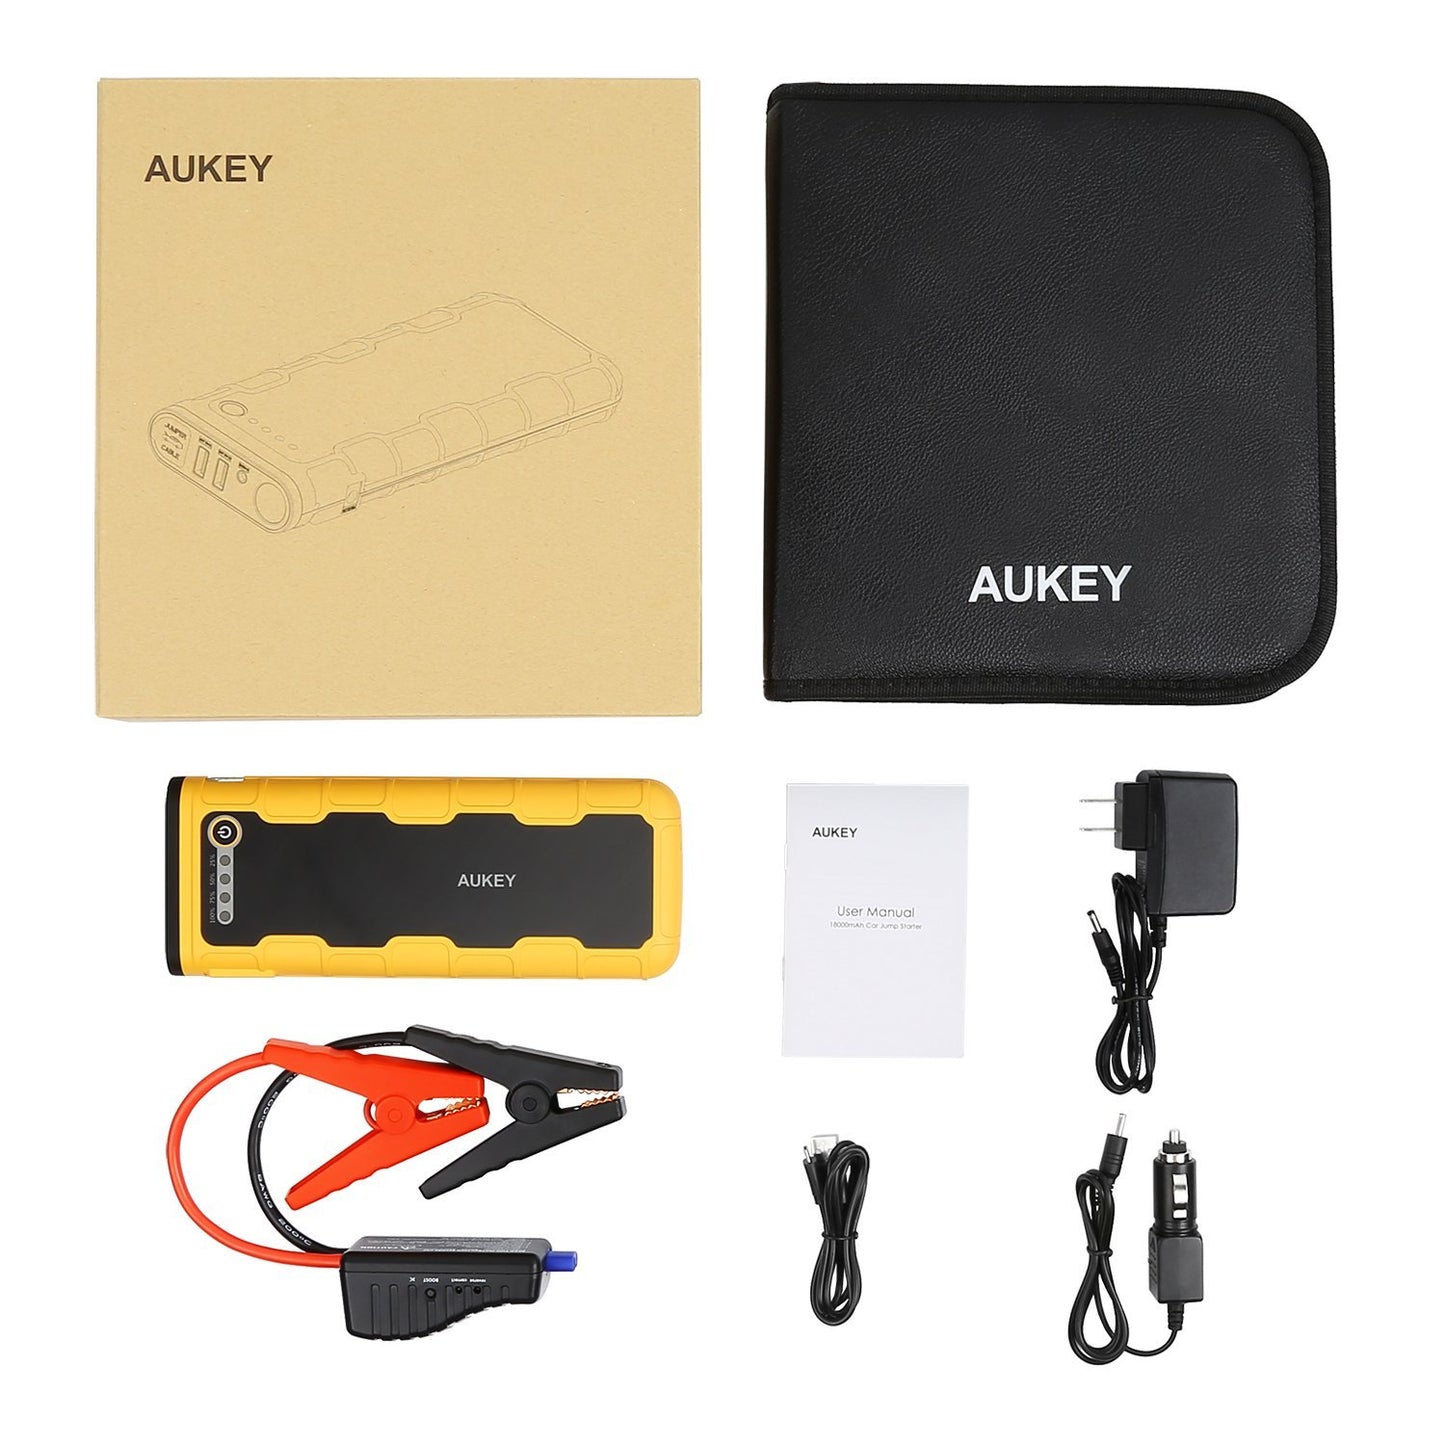 AUKEY 18000mAh Jump Starter with 600A Peak & Smart Clamps Booster for Car, Motorcycles, Lawnmowers, etc.